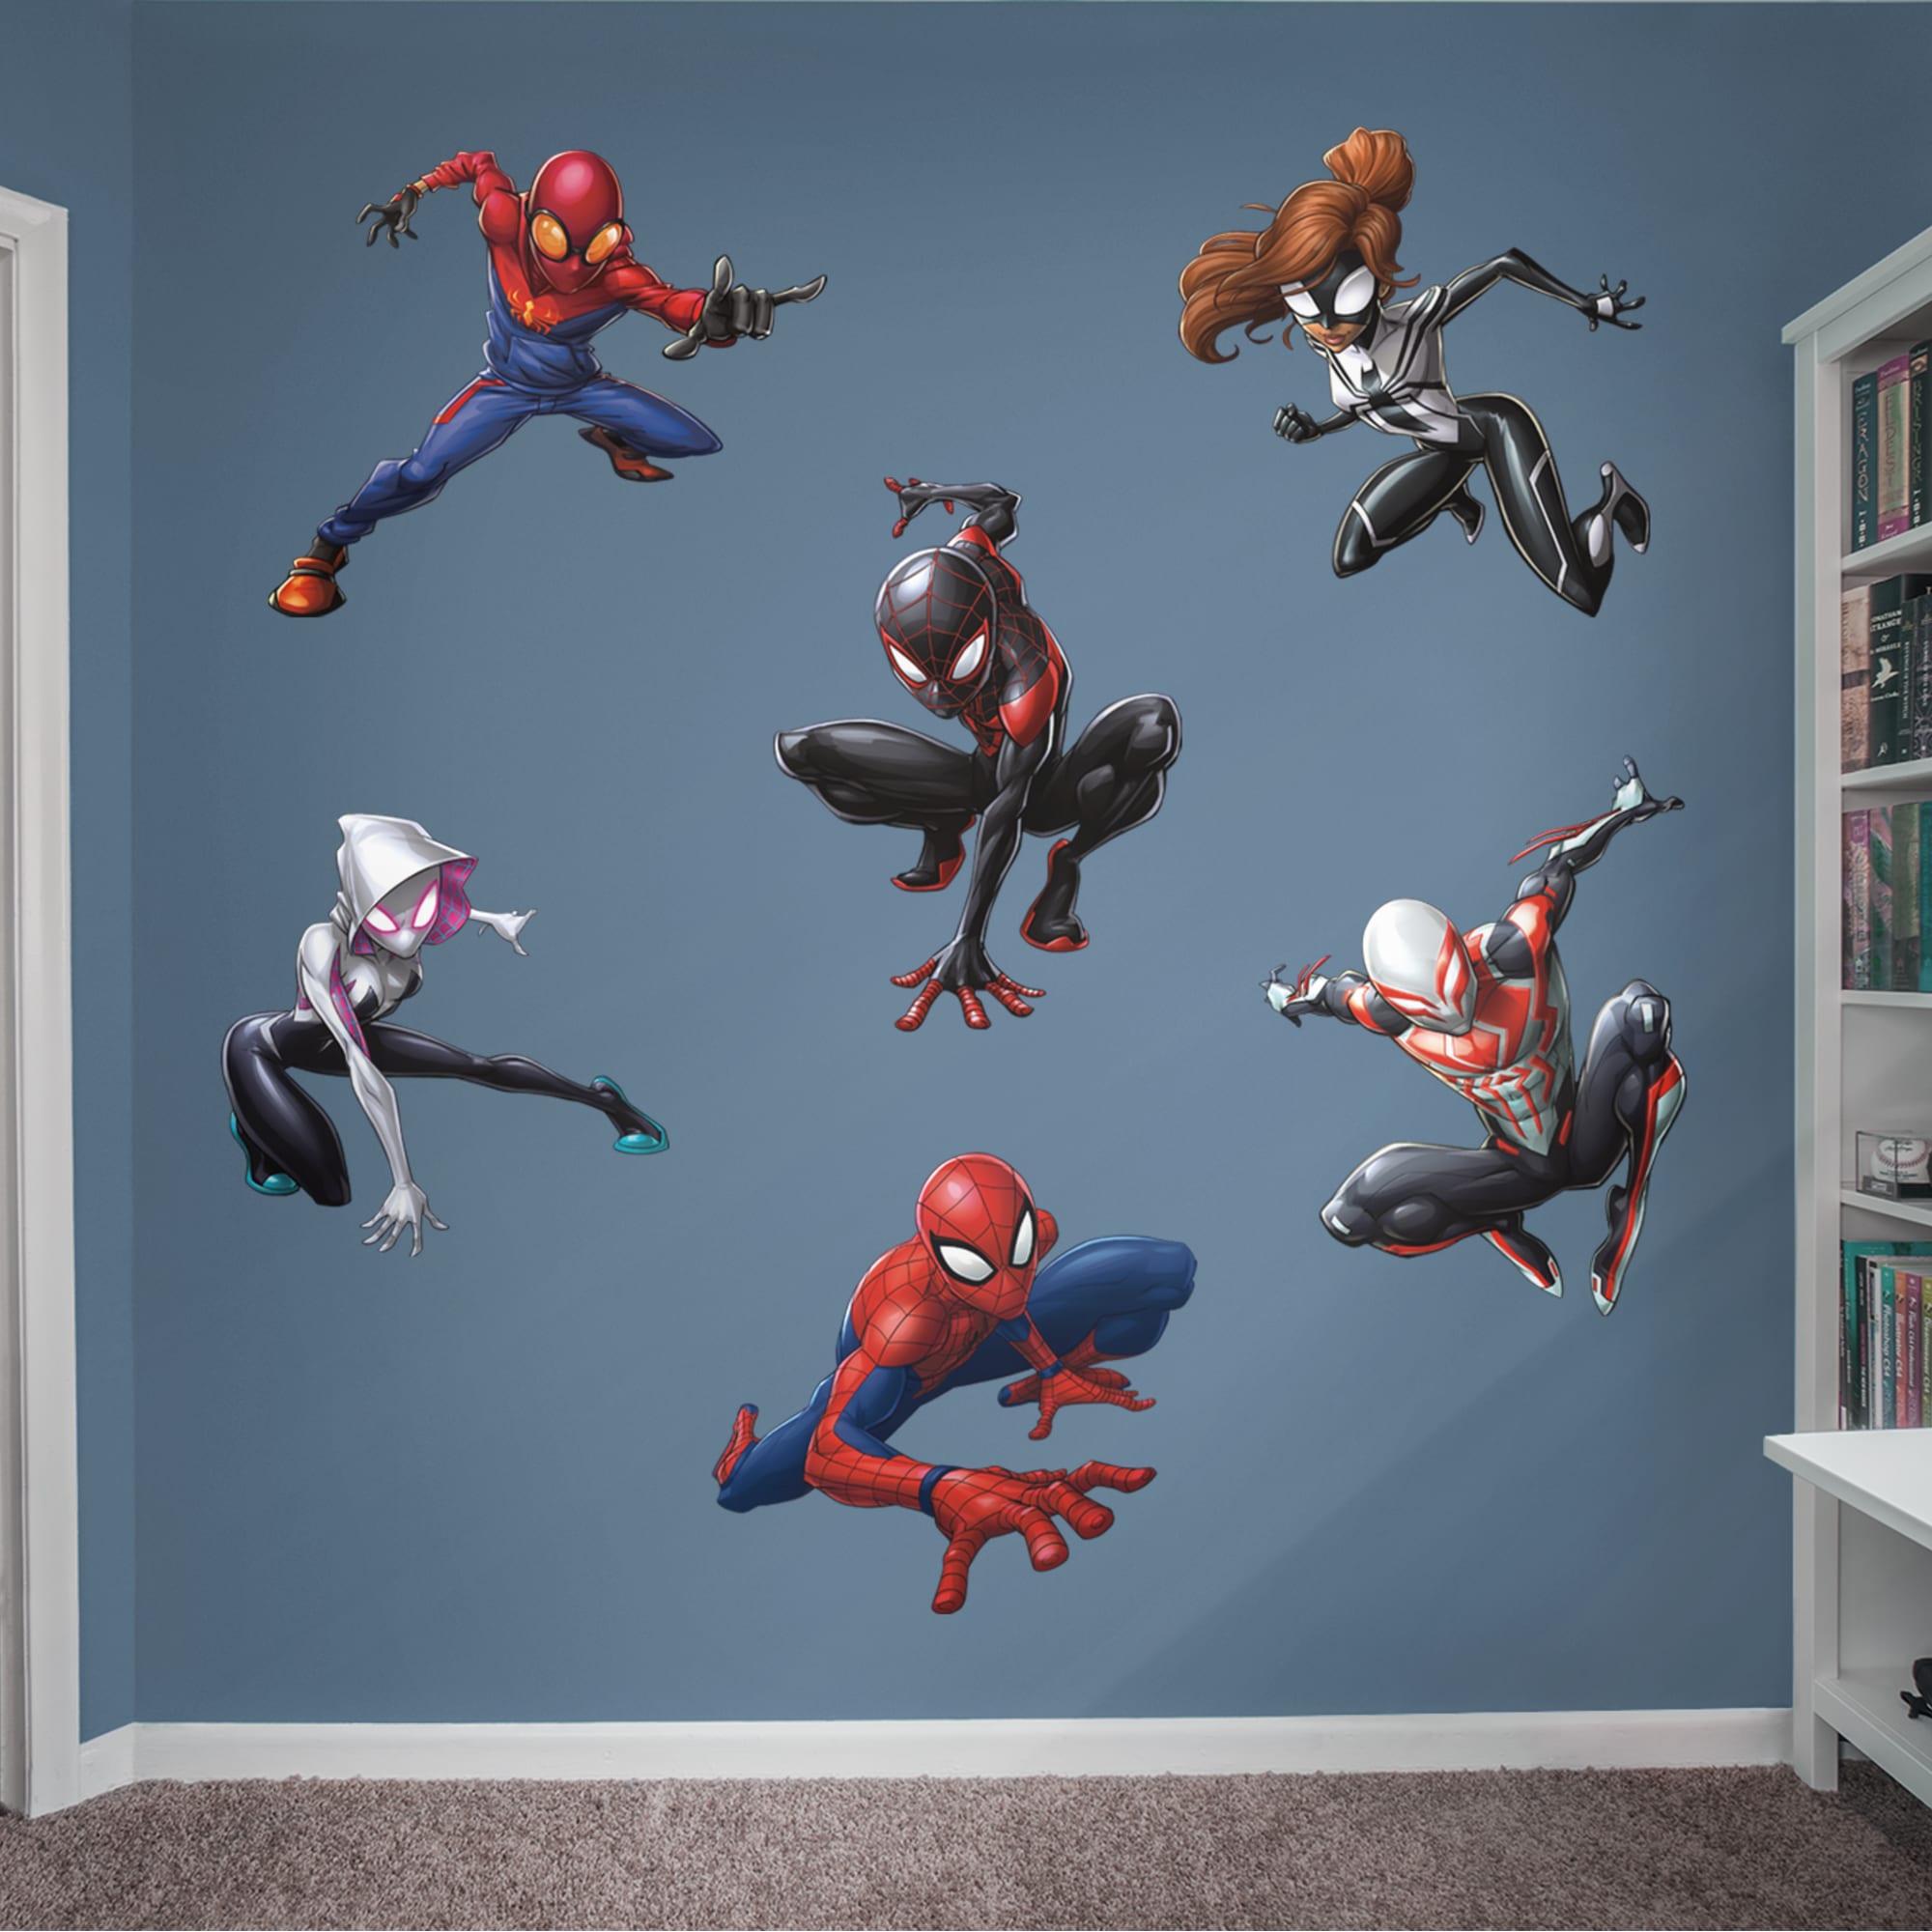 Spider-Man: Heroes Collection - Officially Licensed Removable Wall Decal 37.0"W x 78.0"H by Fathead | Vinyl